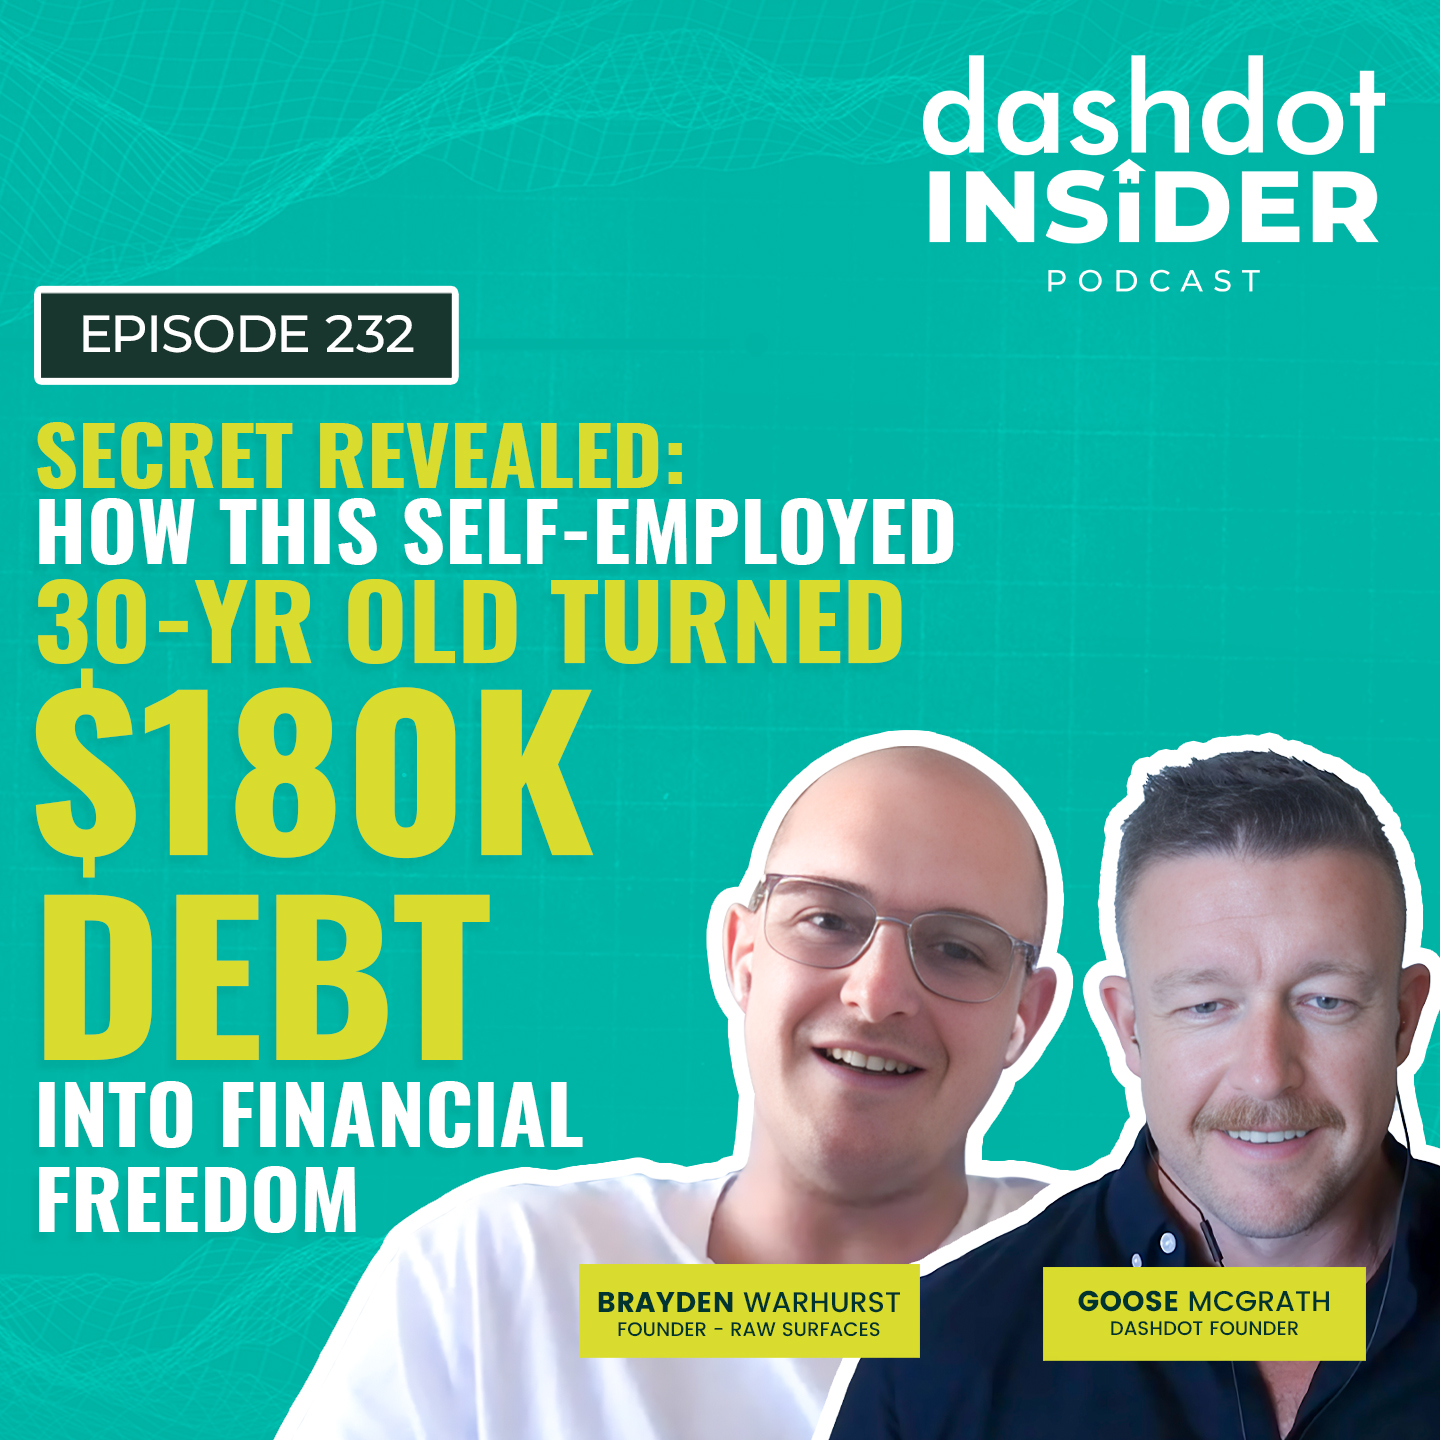 Secret Revealed: How This Self-employed 30-Yr Old Turned $180K Debt into Financial Freedom | #232